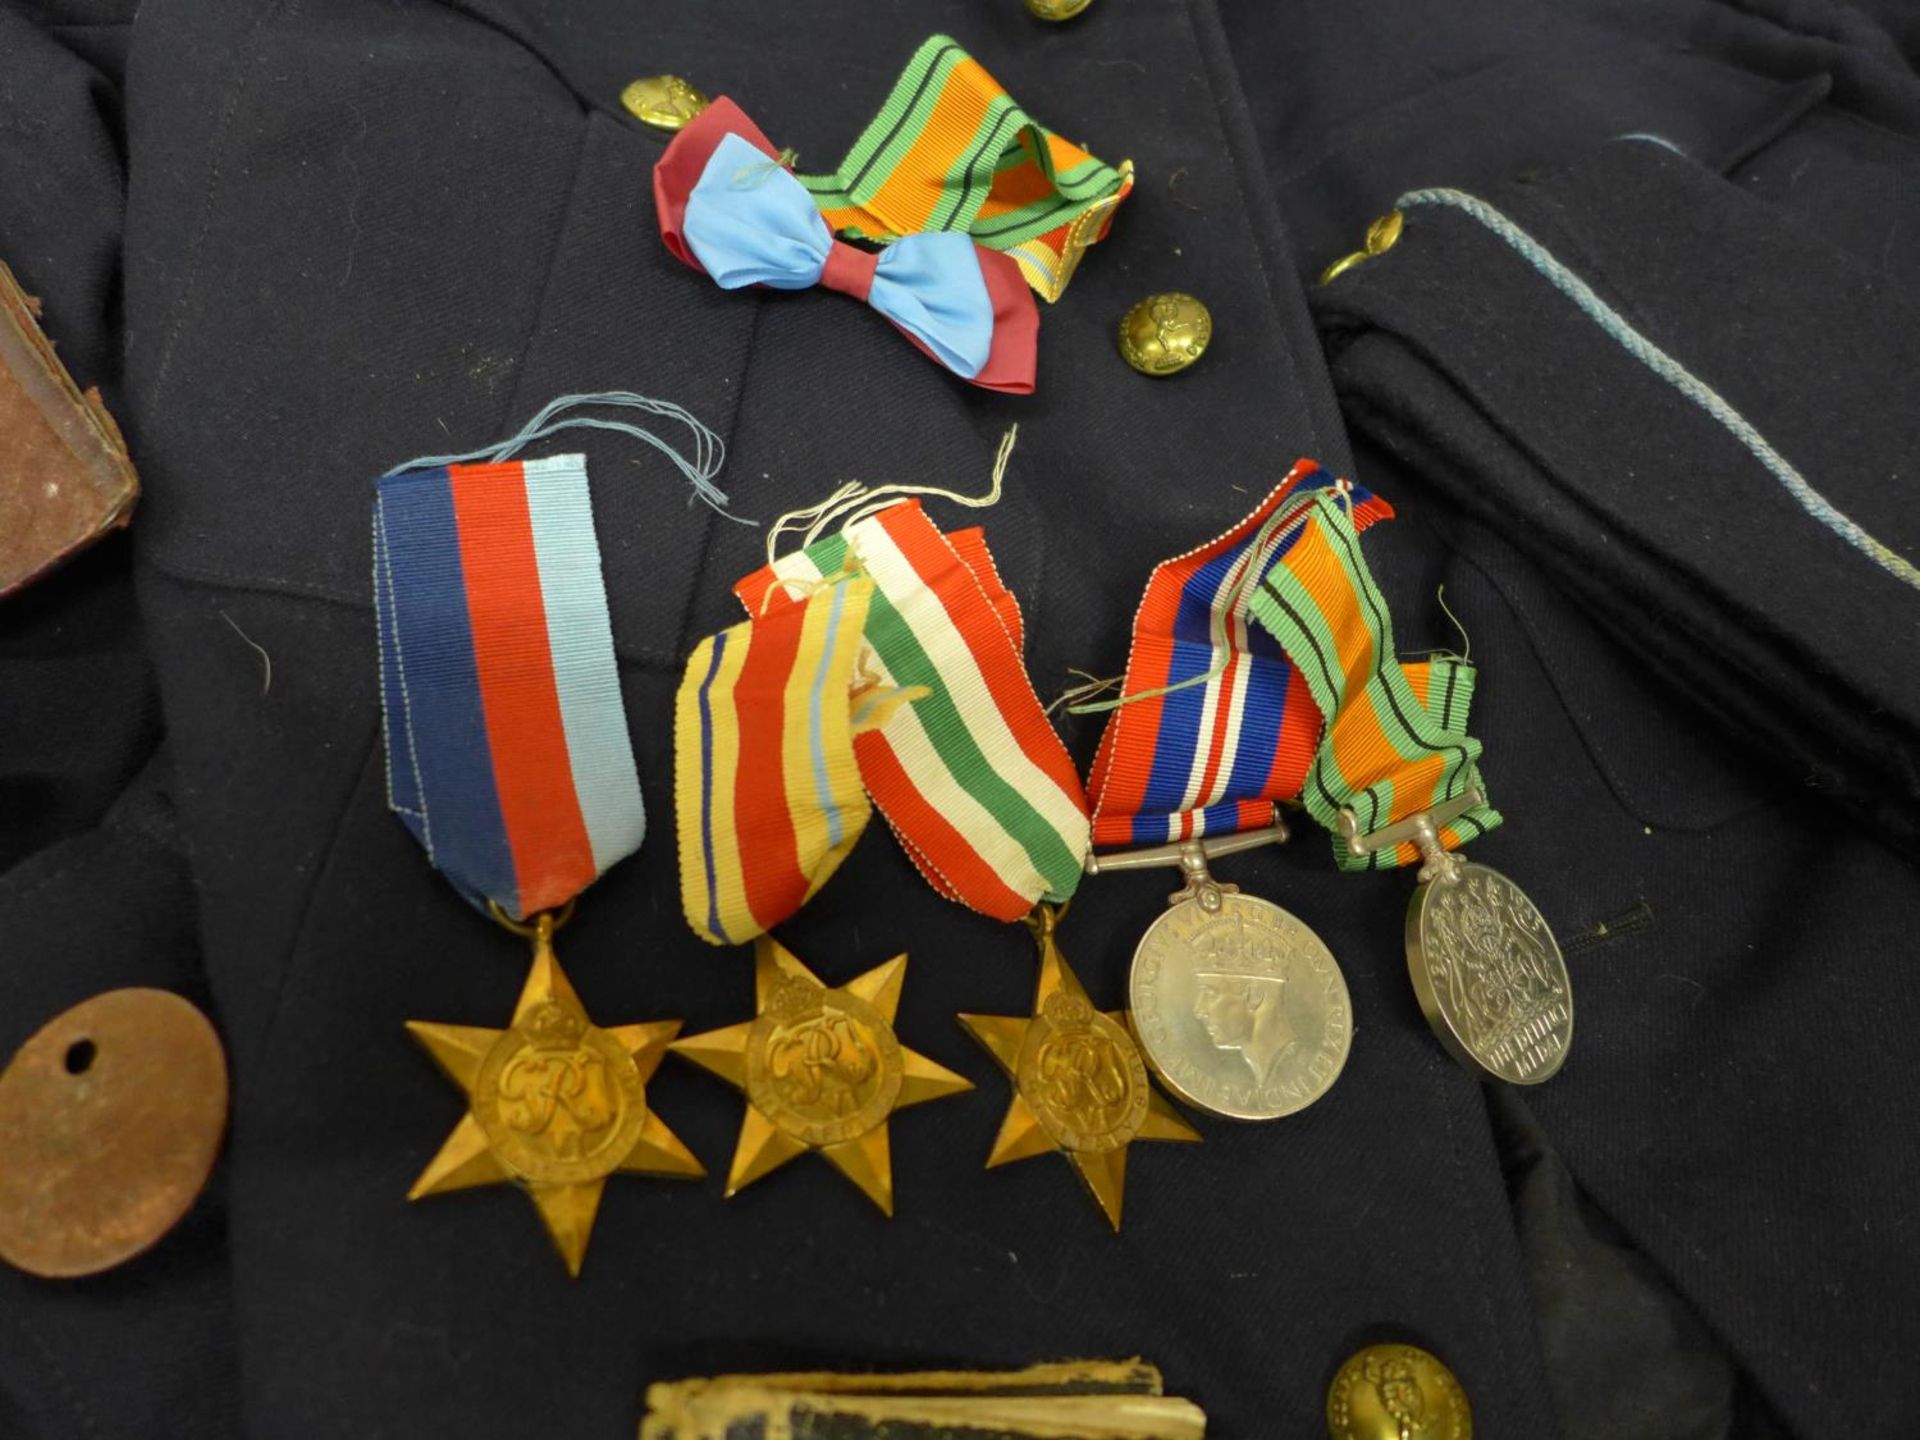 A MEDAL GROUP COMPRISING 1939-45 STAR, AFRICA STAR, ITALY STAR, 1939-45 MEDAL AND DEFENCE MEDAL - Image 2 of 10